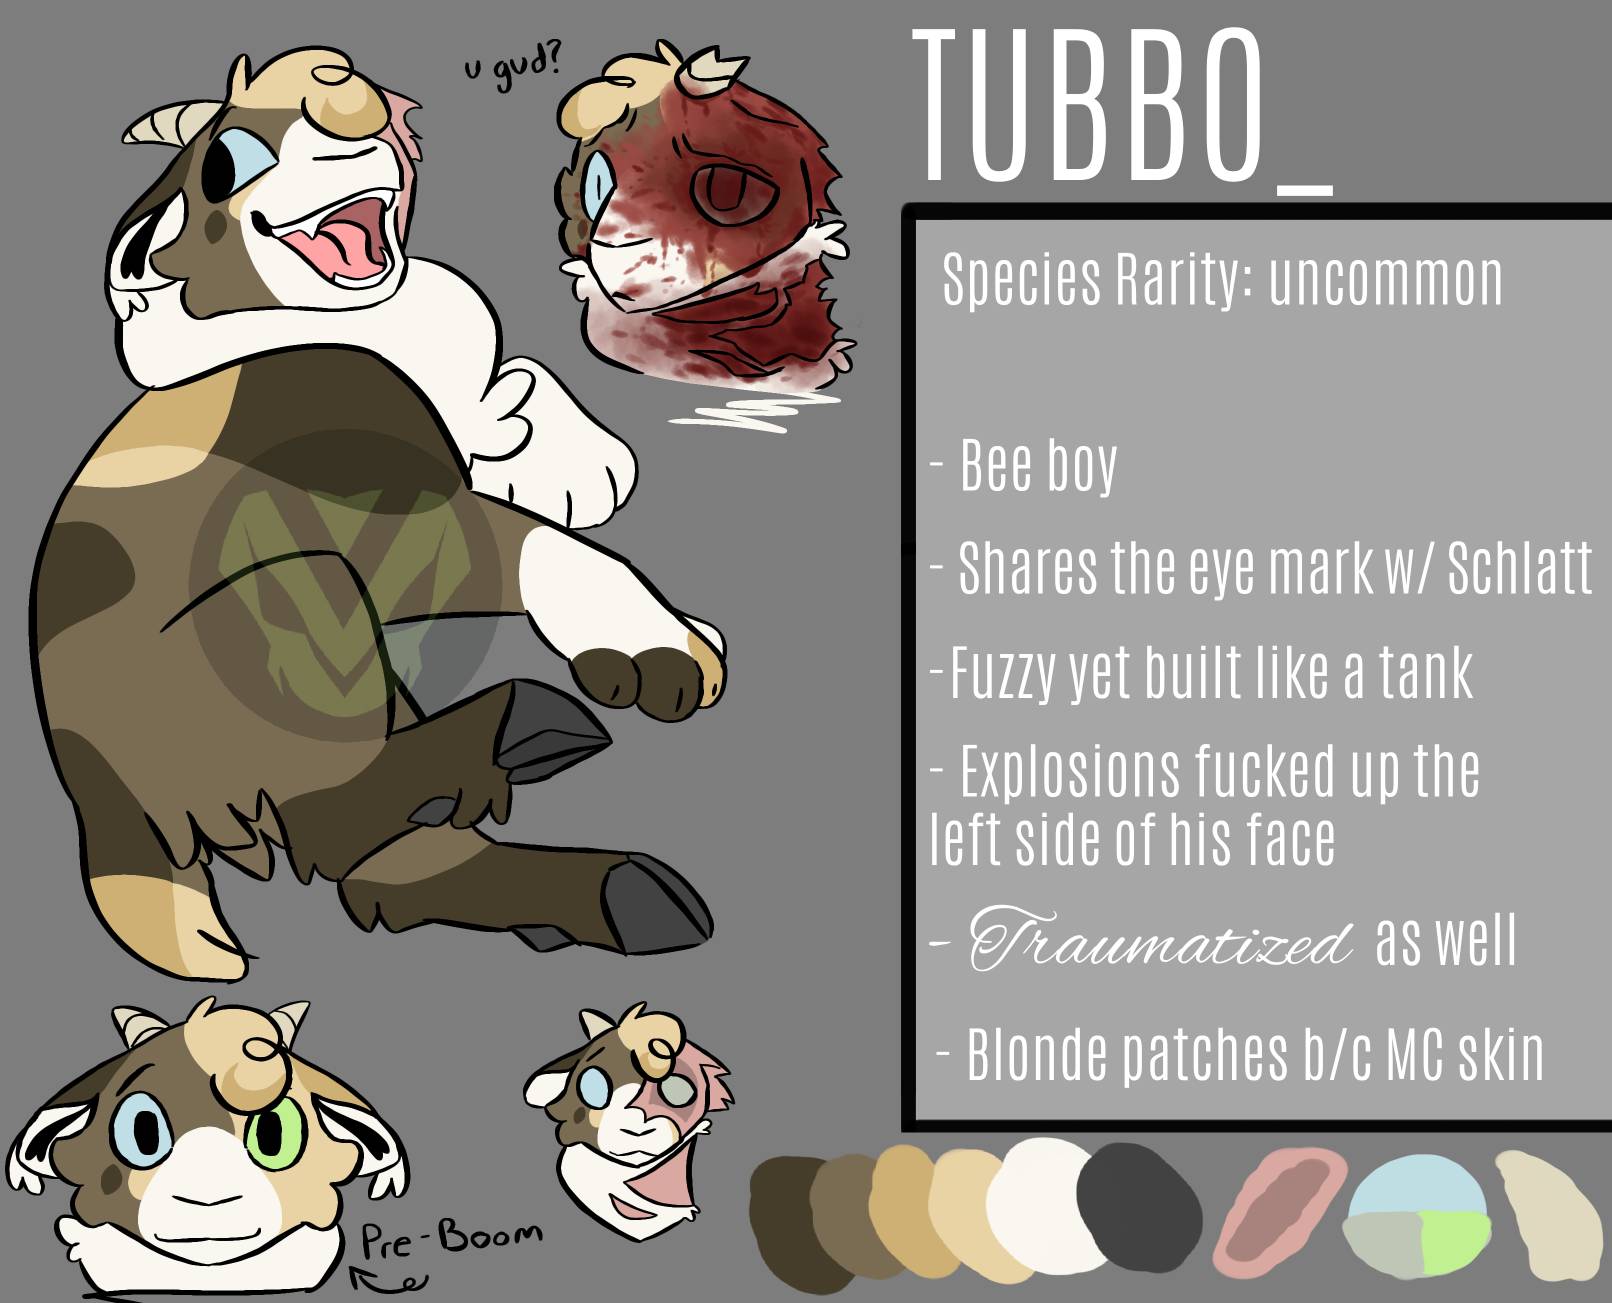 tubbo face reveal | Poster